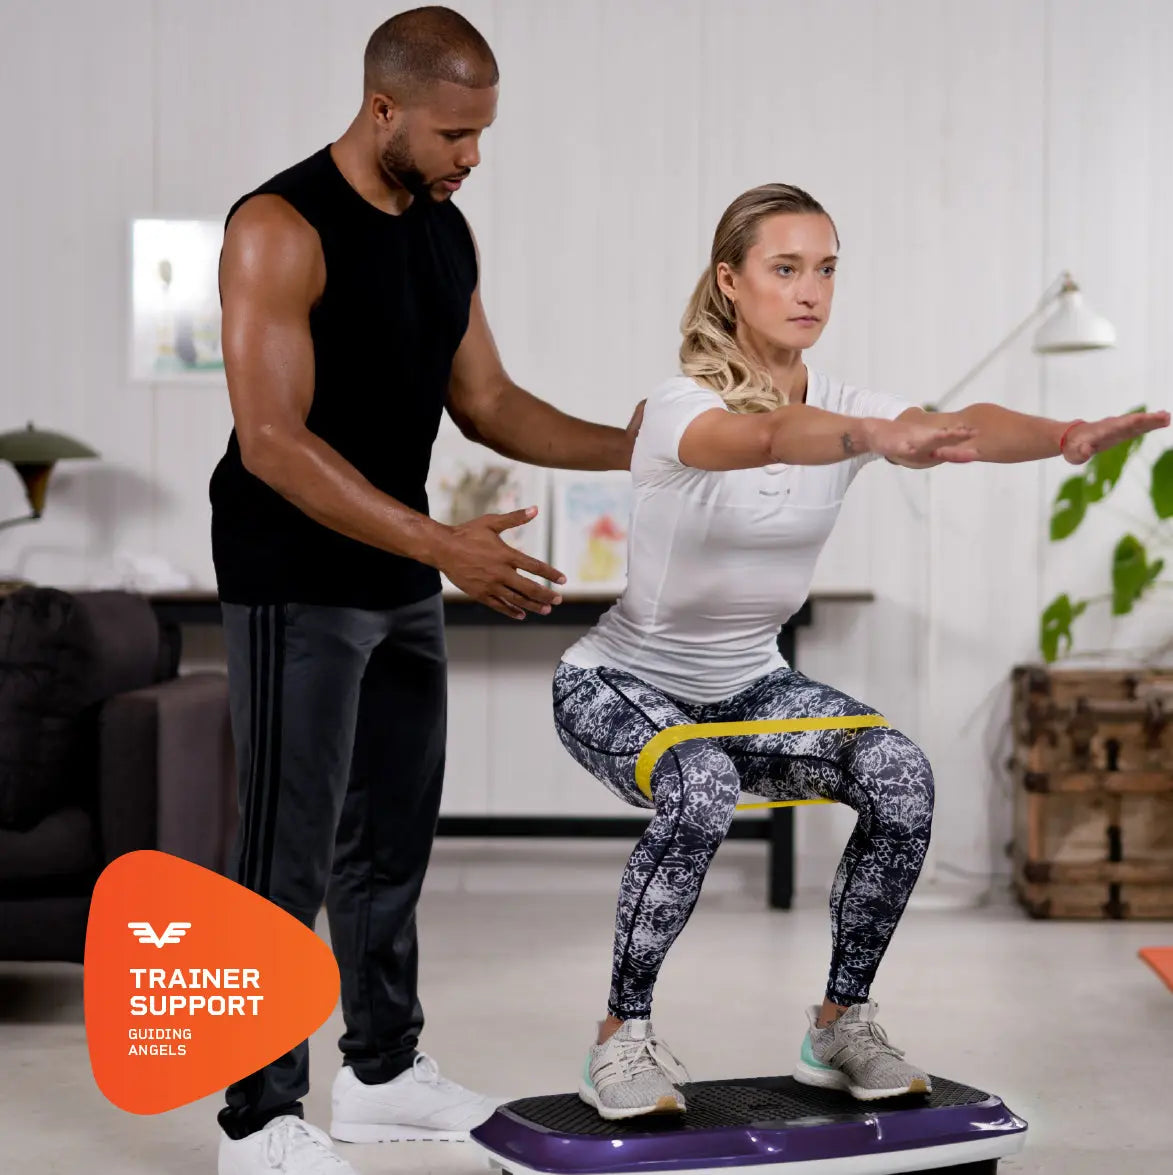 The Best Vibration Plates and Balance Platforms: What to Look For